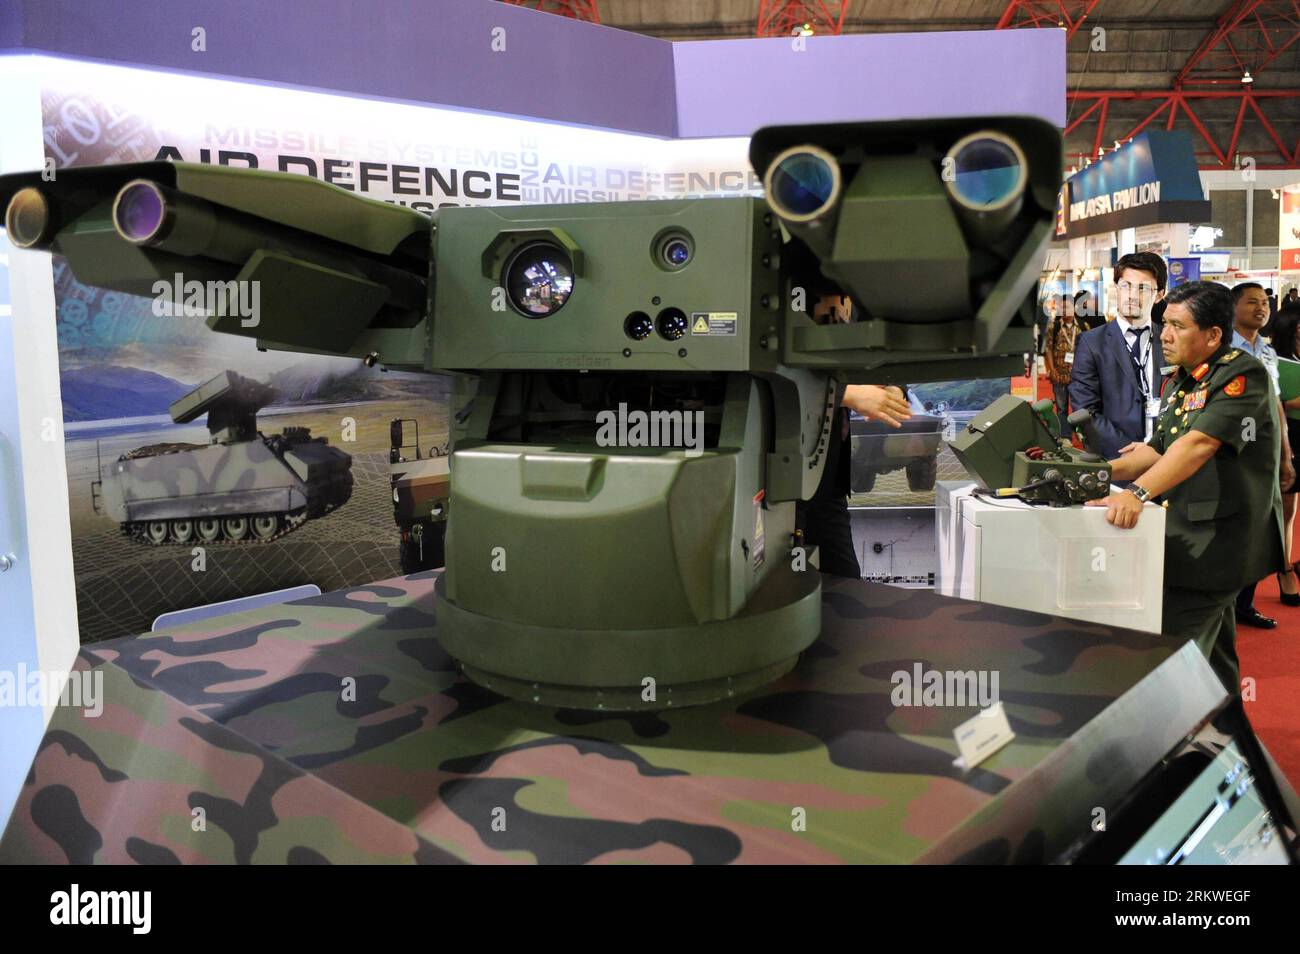 Bildnummer: 58673904  Datum: 07.11.2012  Copyright: imago/Xinhua (121107) -- JAKARTA, Nov. 7, 2012 (Xinhua) -- An Aselsan Air Defence equipment is displayed at the Indodefence 2012 Expo and Forum held in Jakarta International Expo Kemayoran, Indonesia, Nov. 7, 2012. As many as 603 firms from 42 countries and areas attended the Indodefence 2012 Expo and Forum Wednesday, one of the biggest industry gatherings in Southeast Asia this year. (Xinhua/Veri Sanovri) (zjl) INDONESIA-JAKARTA-INDODEFENCE 2012 PUBLICATIONxNOTxINxCHN Wirtschaft Rüstung Industrie Rüstungsindustrie Messe Rüstungsmesse Militär Stock Photo